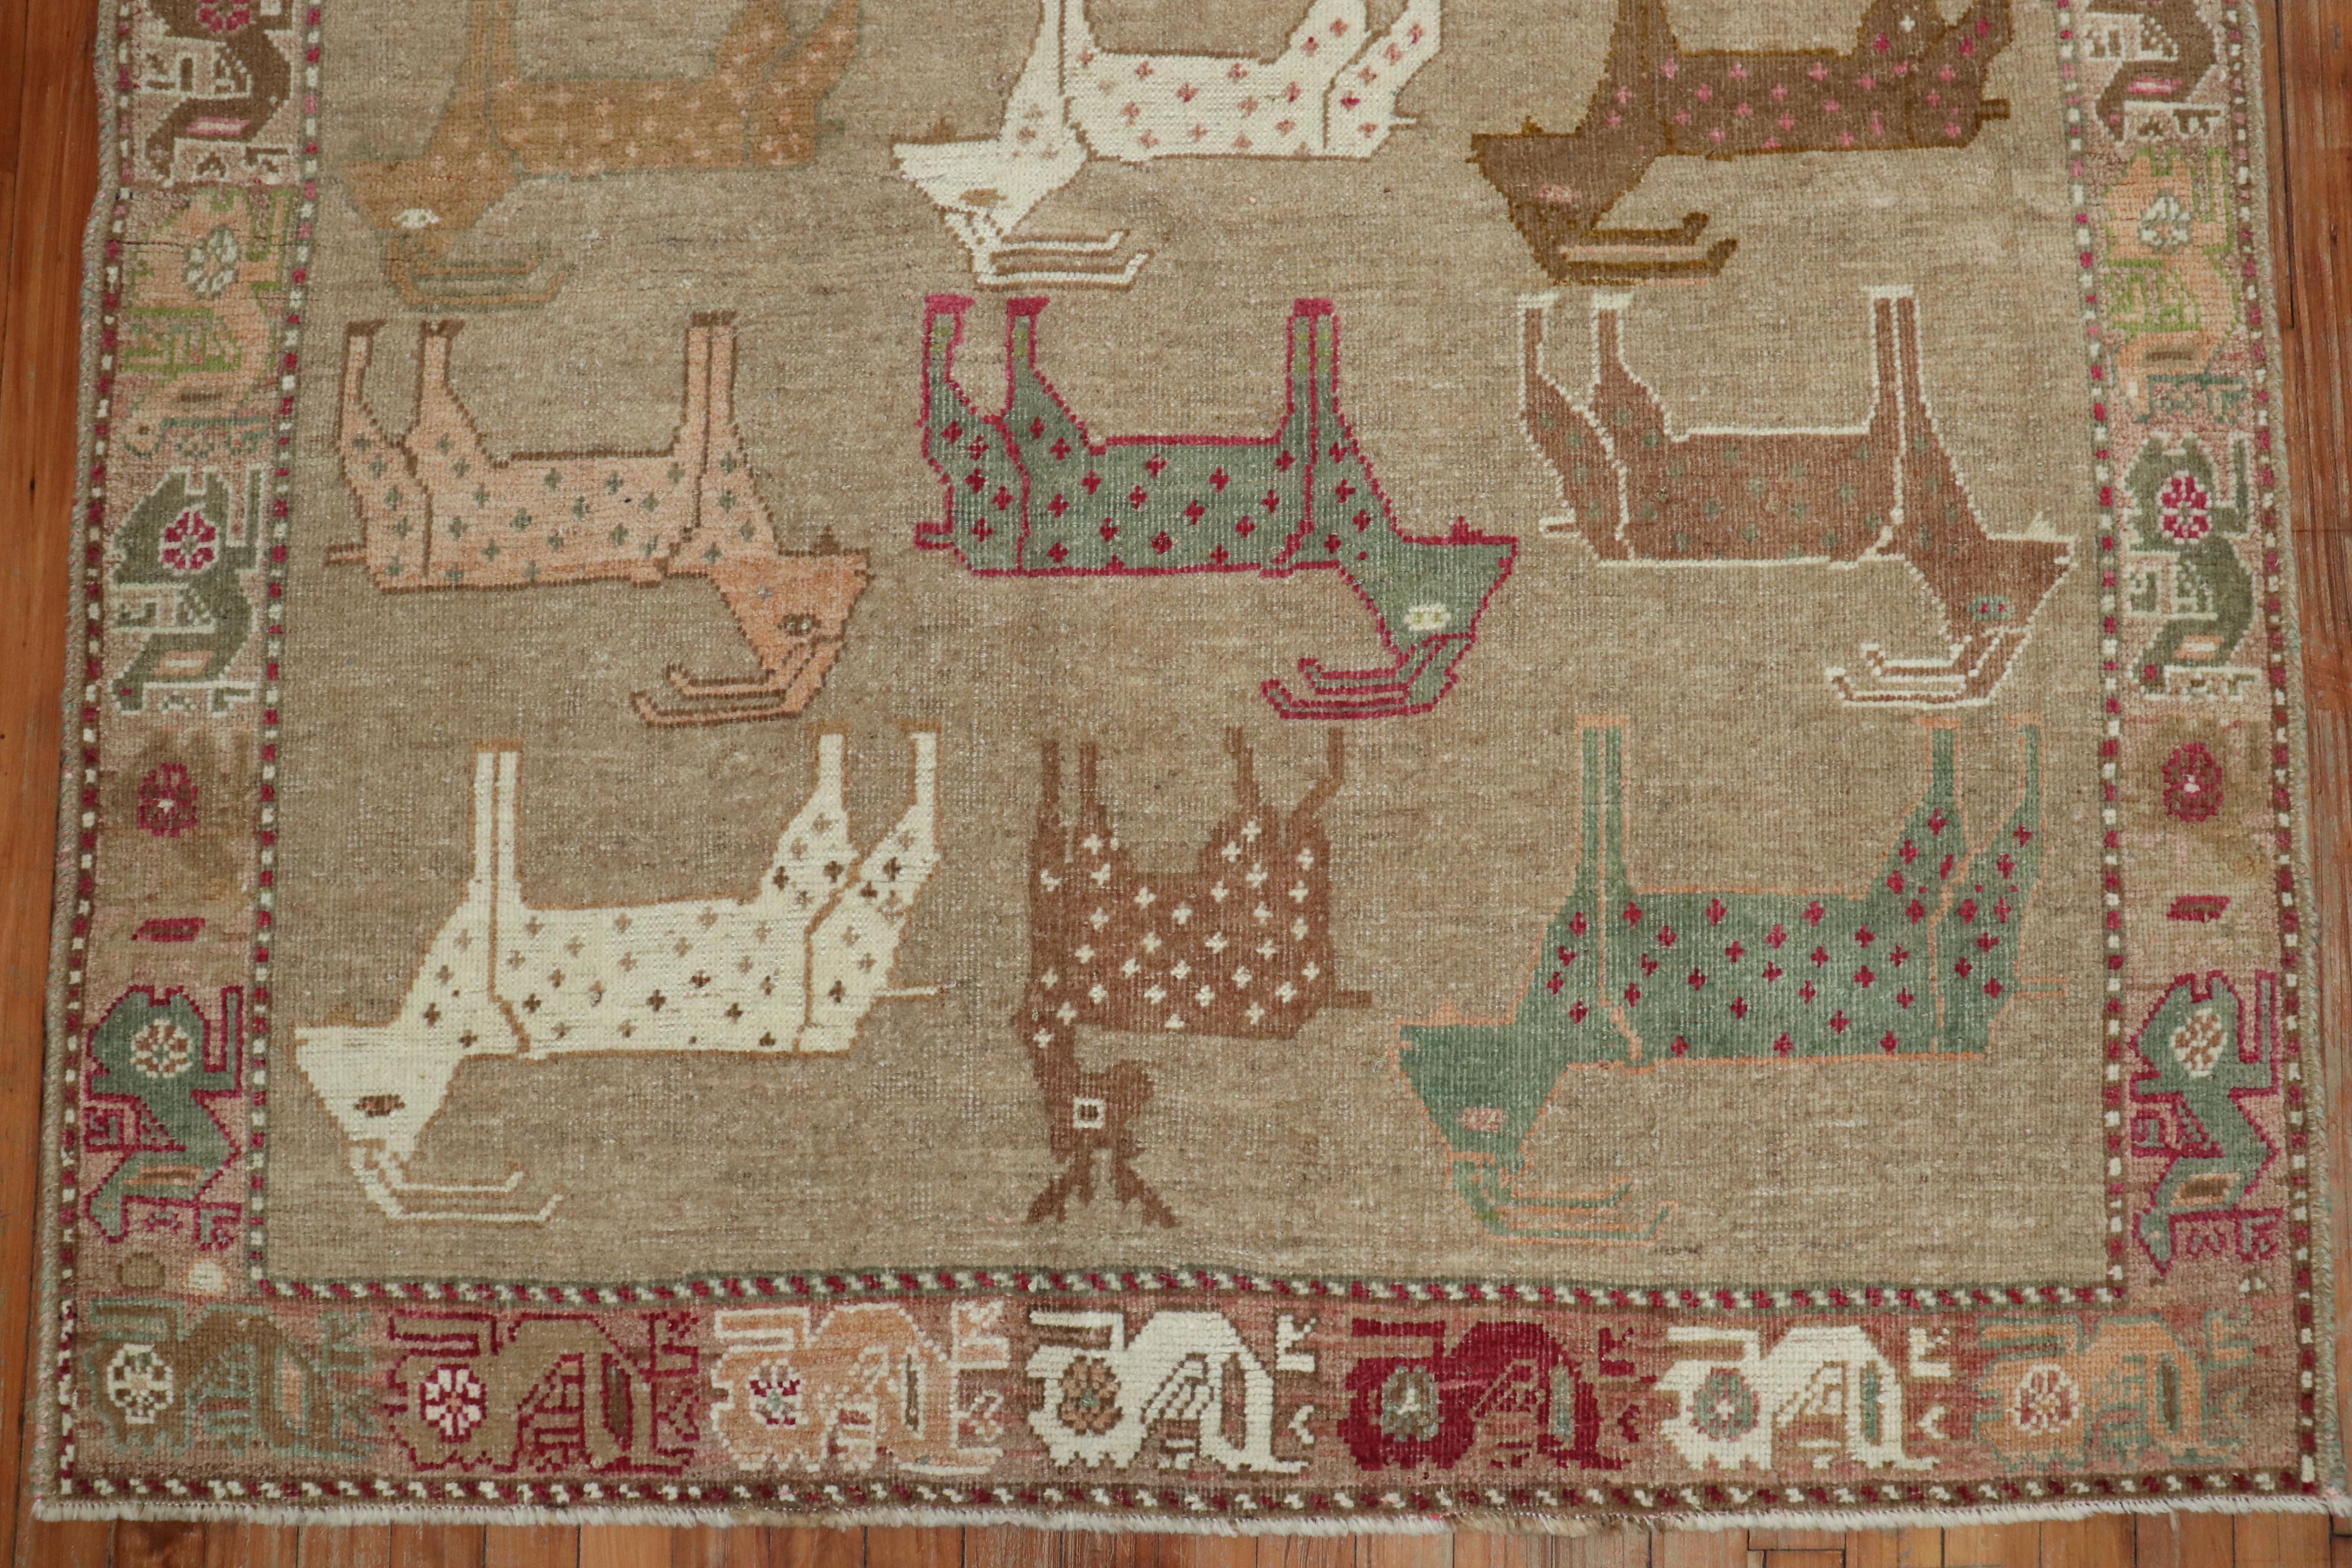 Hand-Knotted Goat Deer Animal Persian Gabbeh Rug, 20th Century